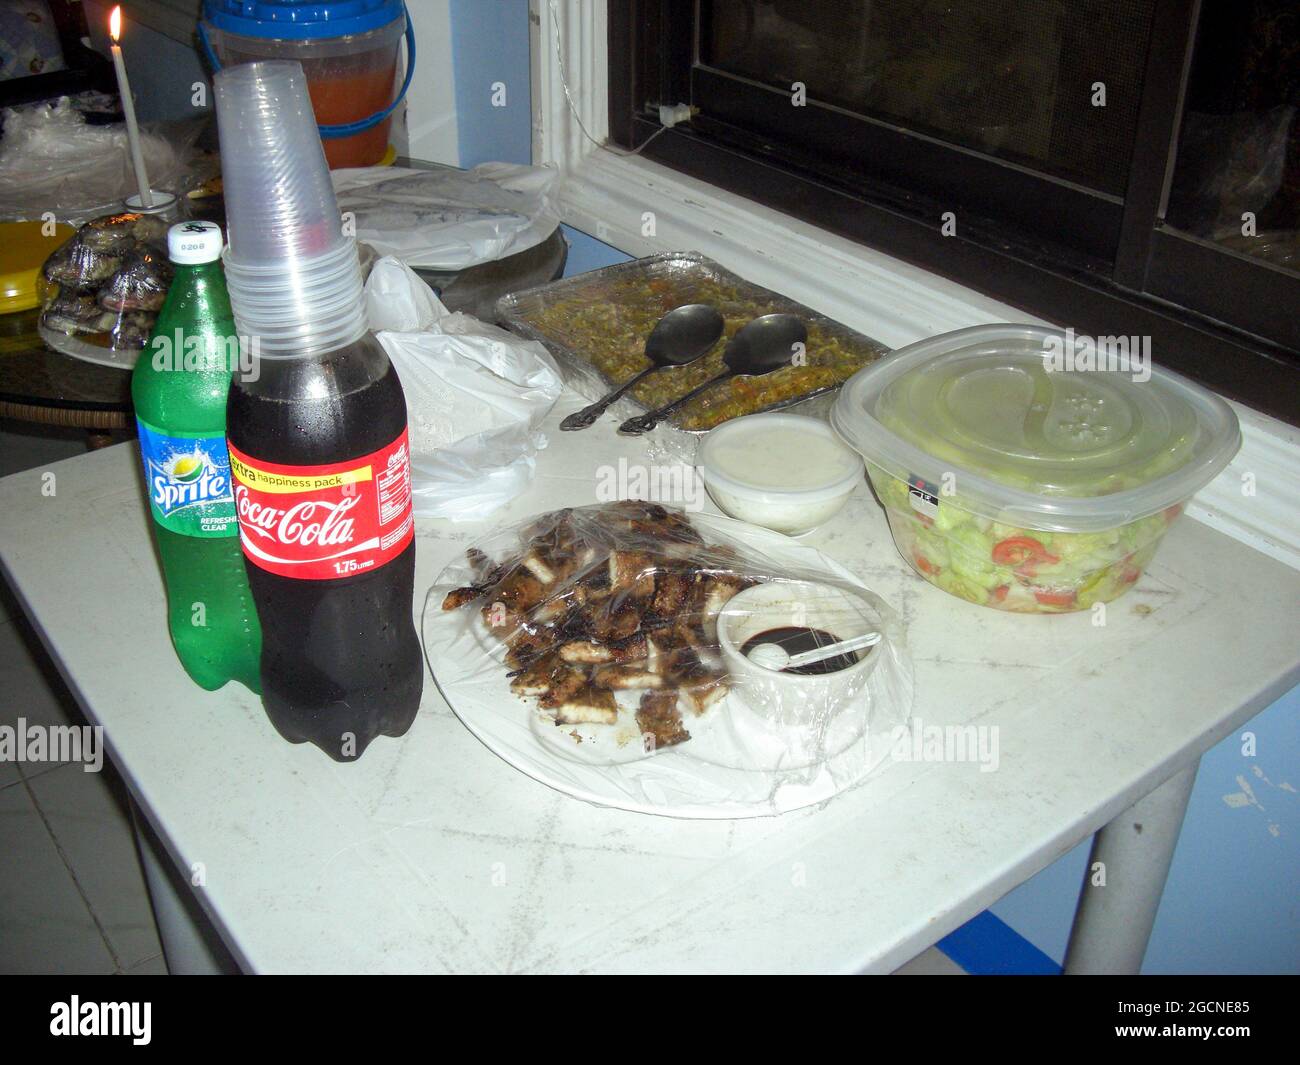 Table is prepared with some food and drinks in Sabang at the Philippines 9.12.2016 Stock Photo